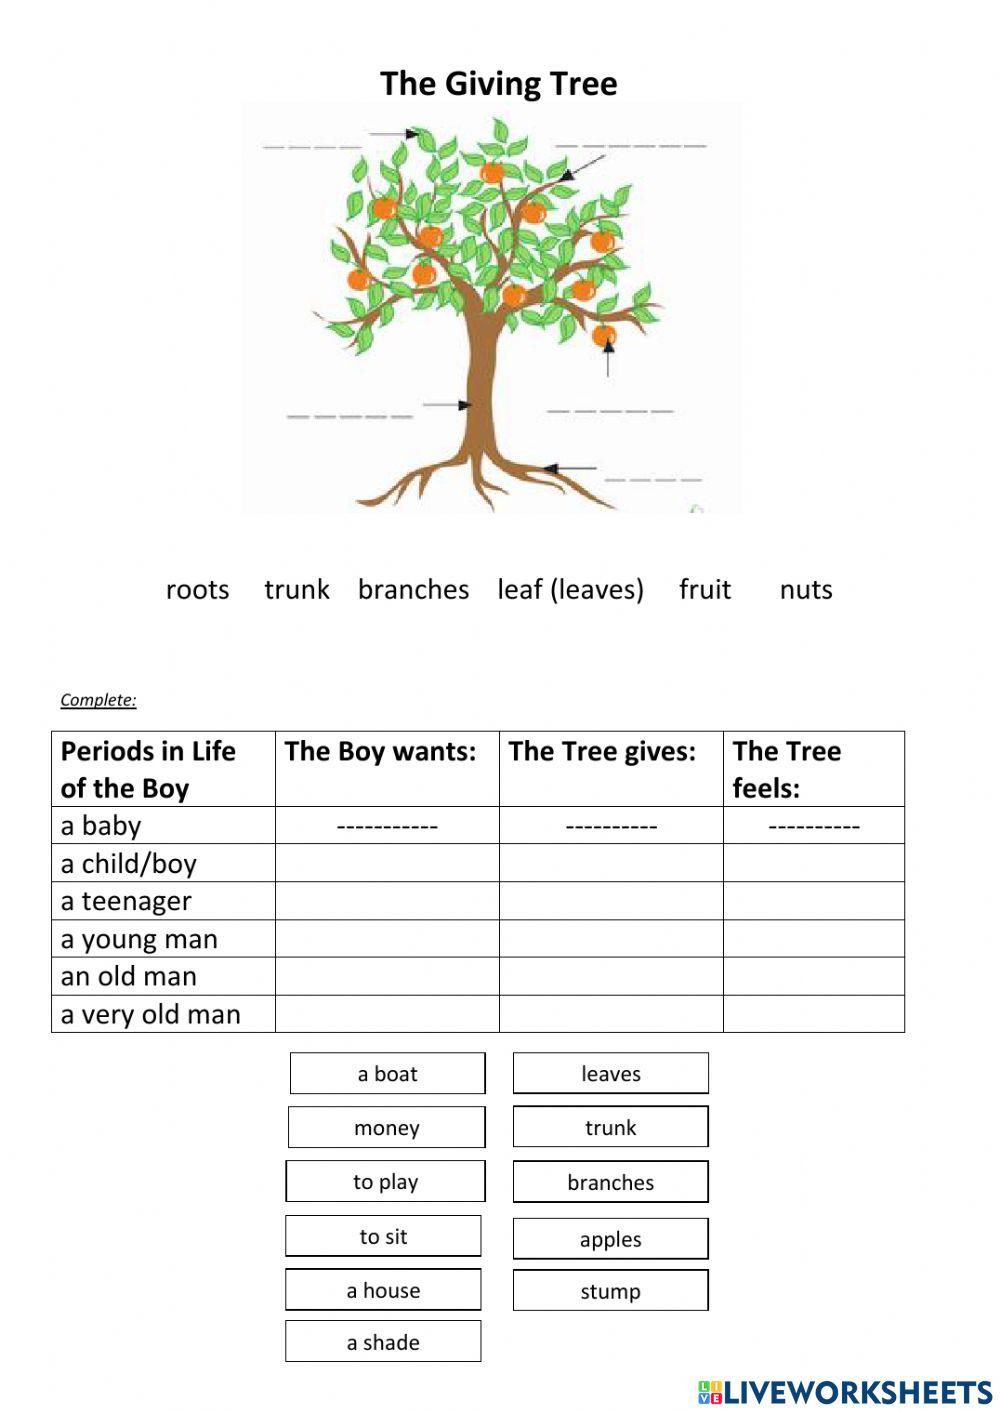 The giving Tree